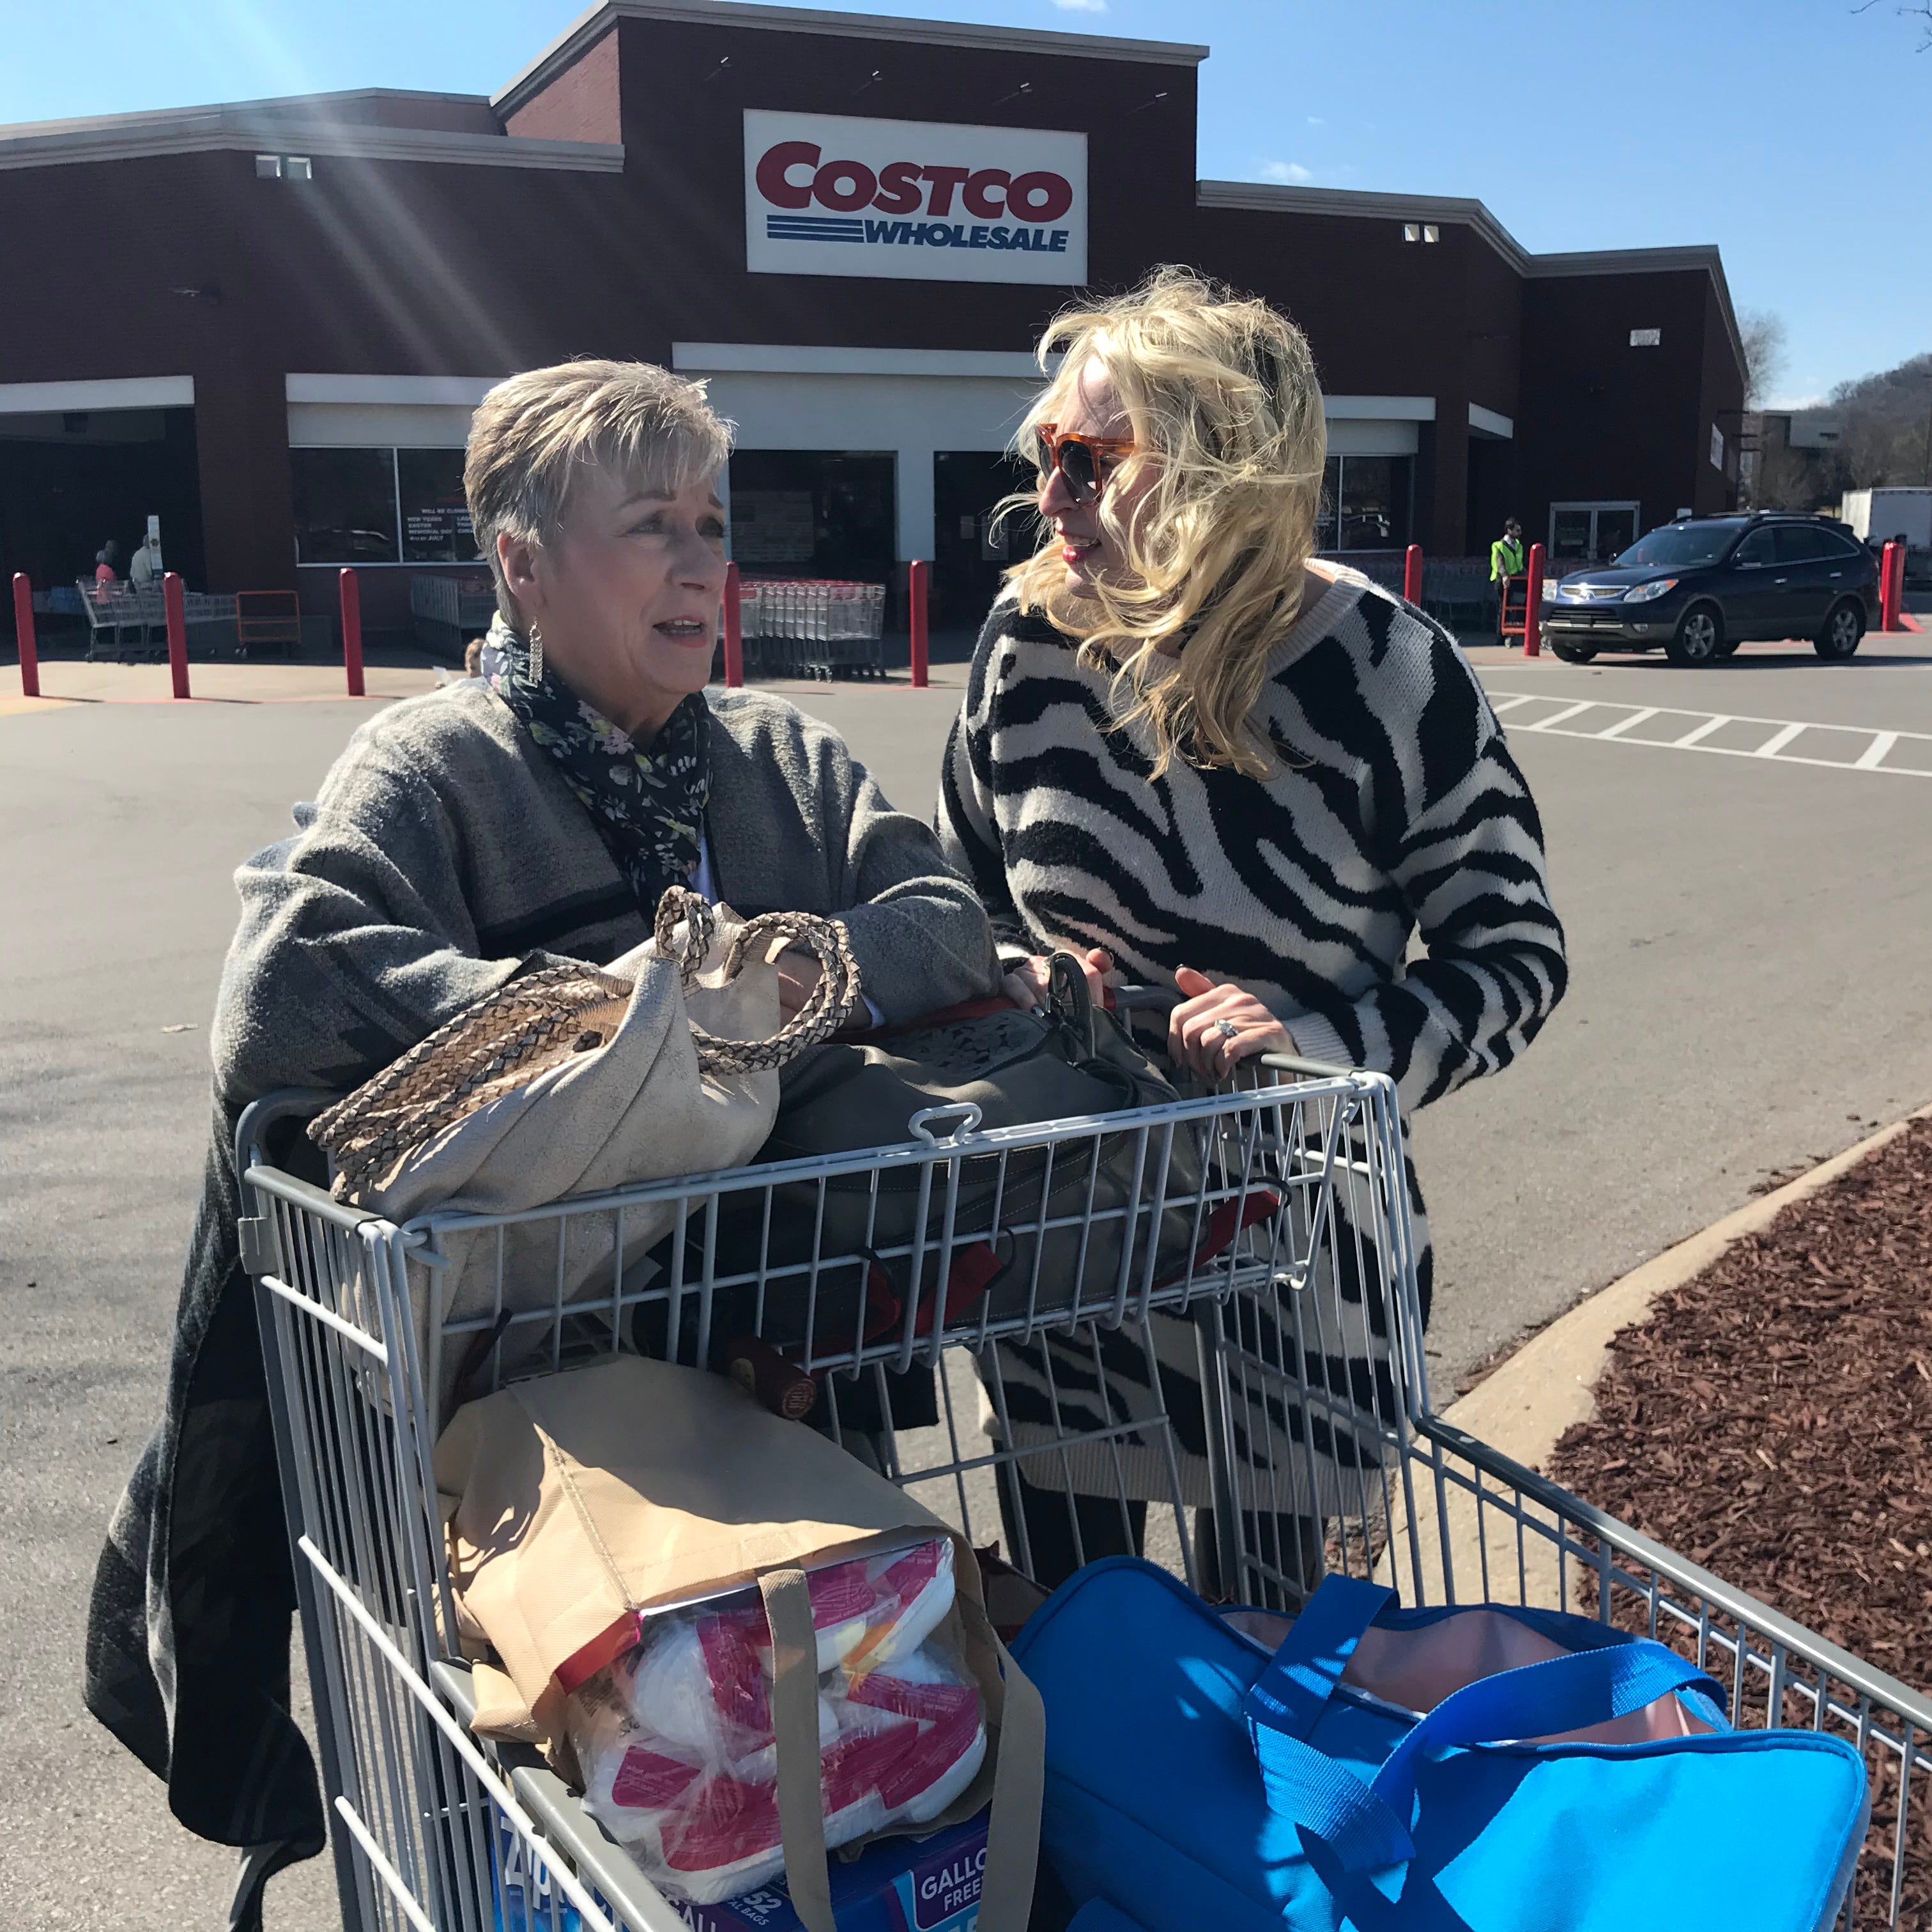 Nancy Garrett and her daughter Kelsey Walny made a shopping trip to Costco Wholesale in Brentwood, located on Seaboard Lane, bordering of Cool Springs.